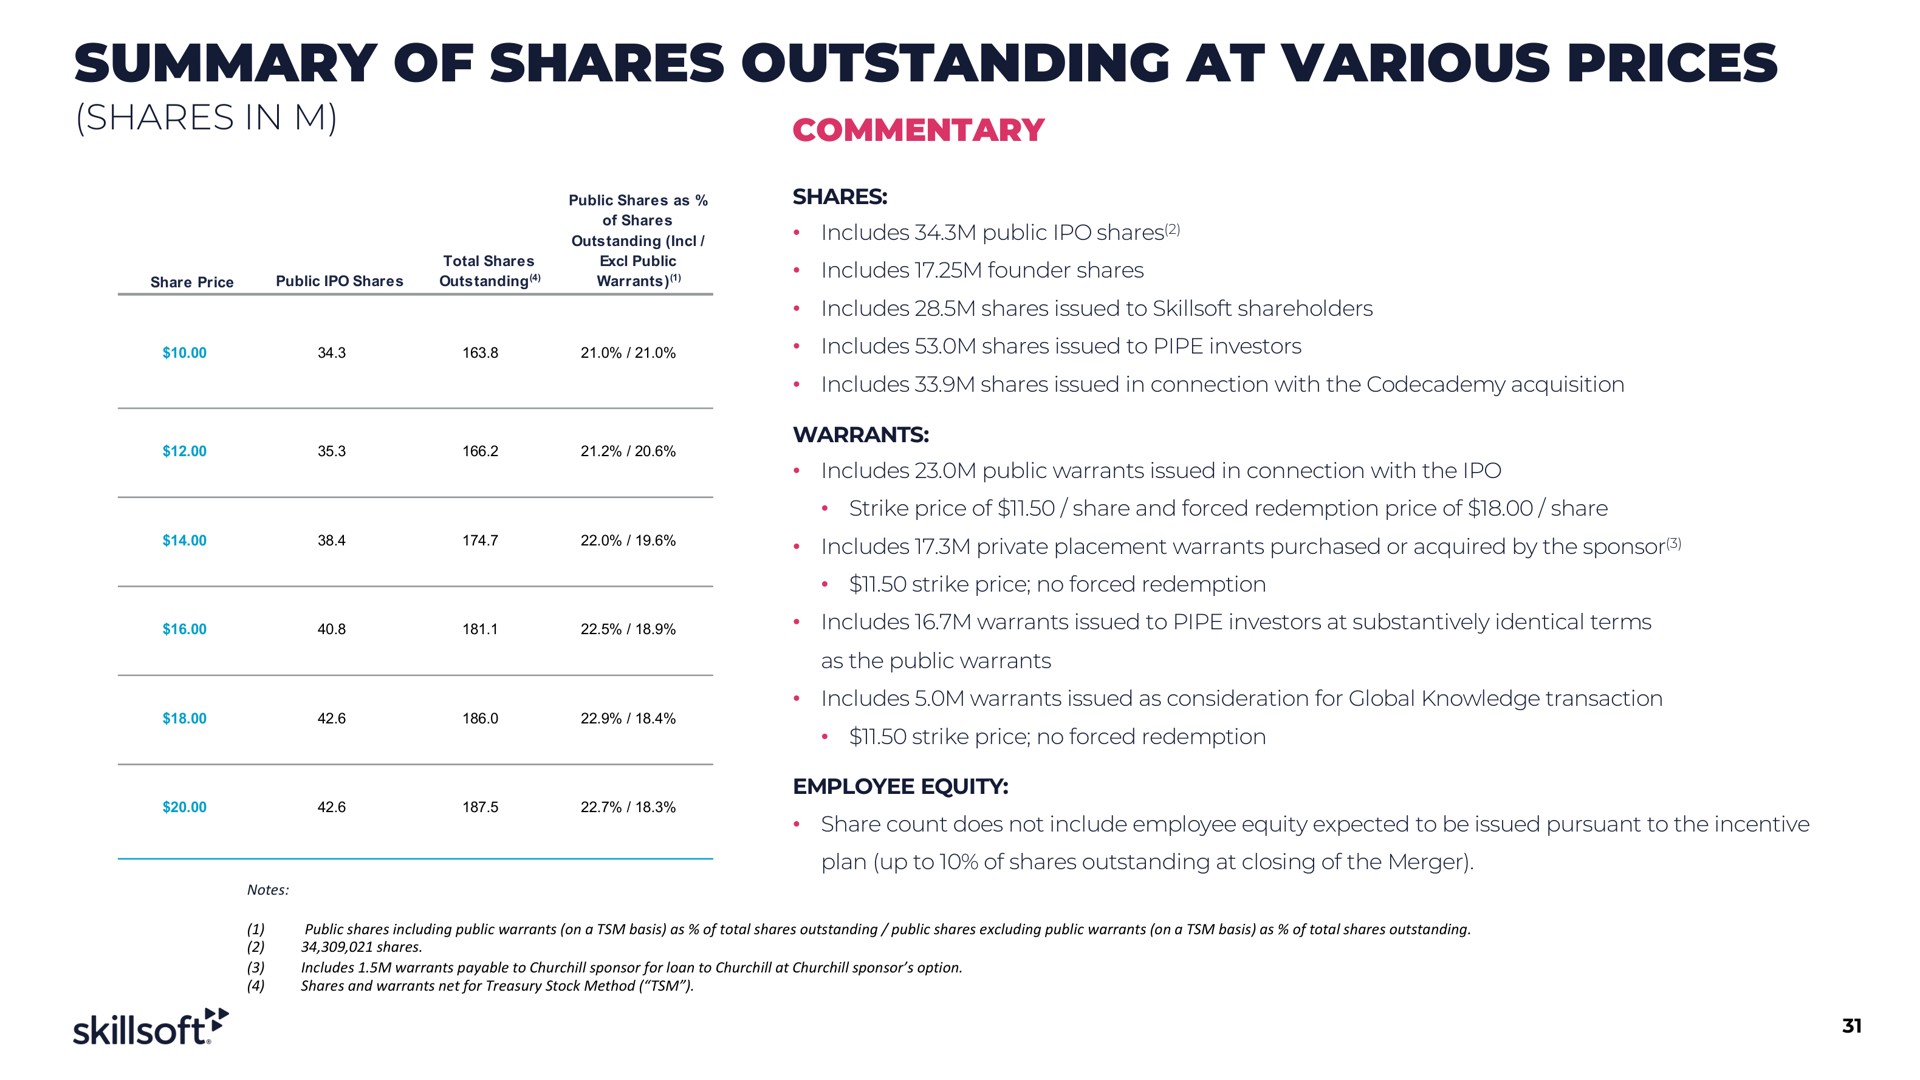 summary of shares outstanding at various prices | Skillsoft